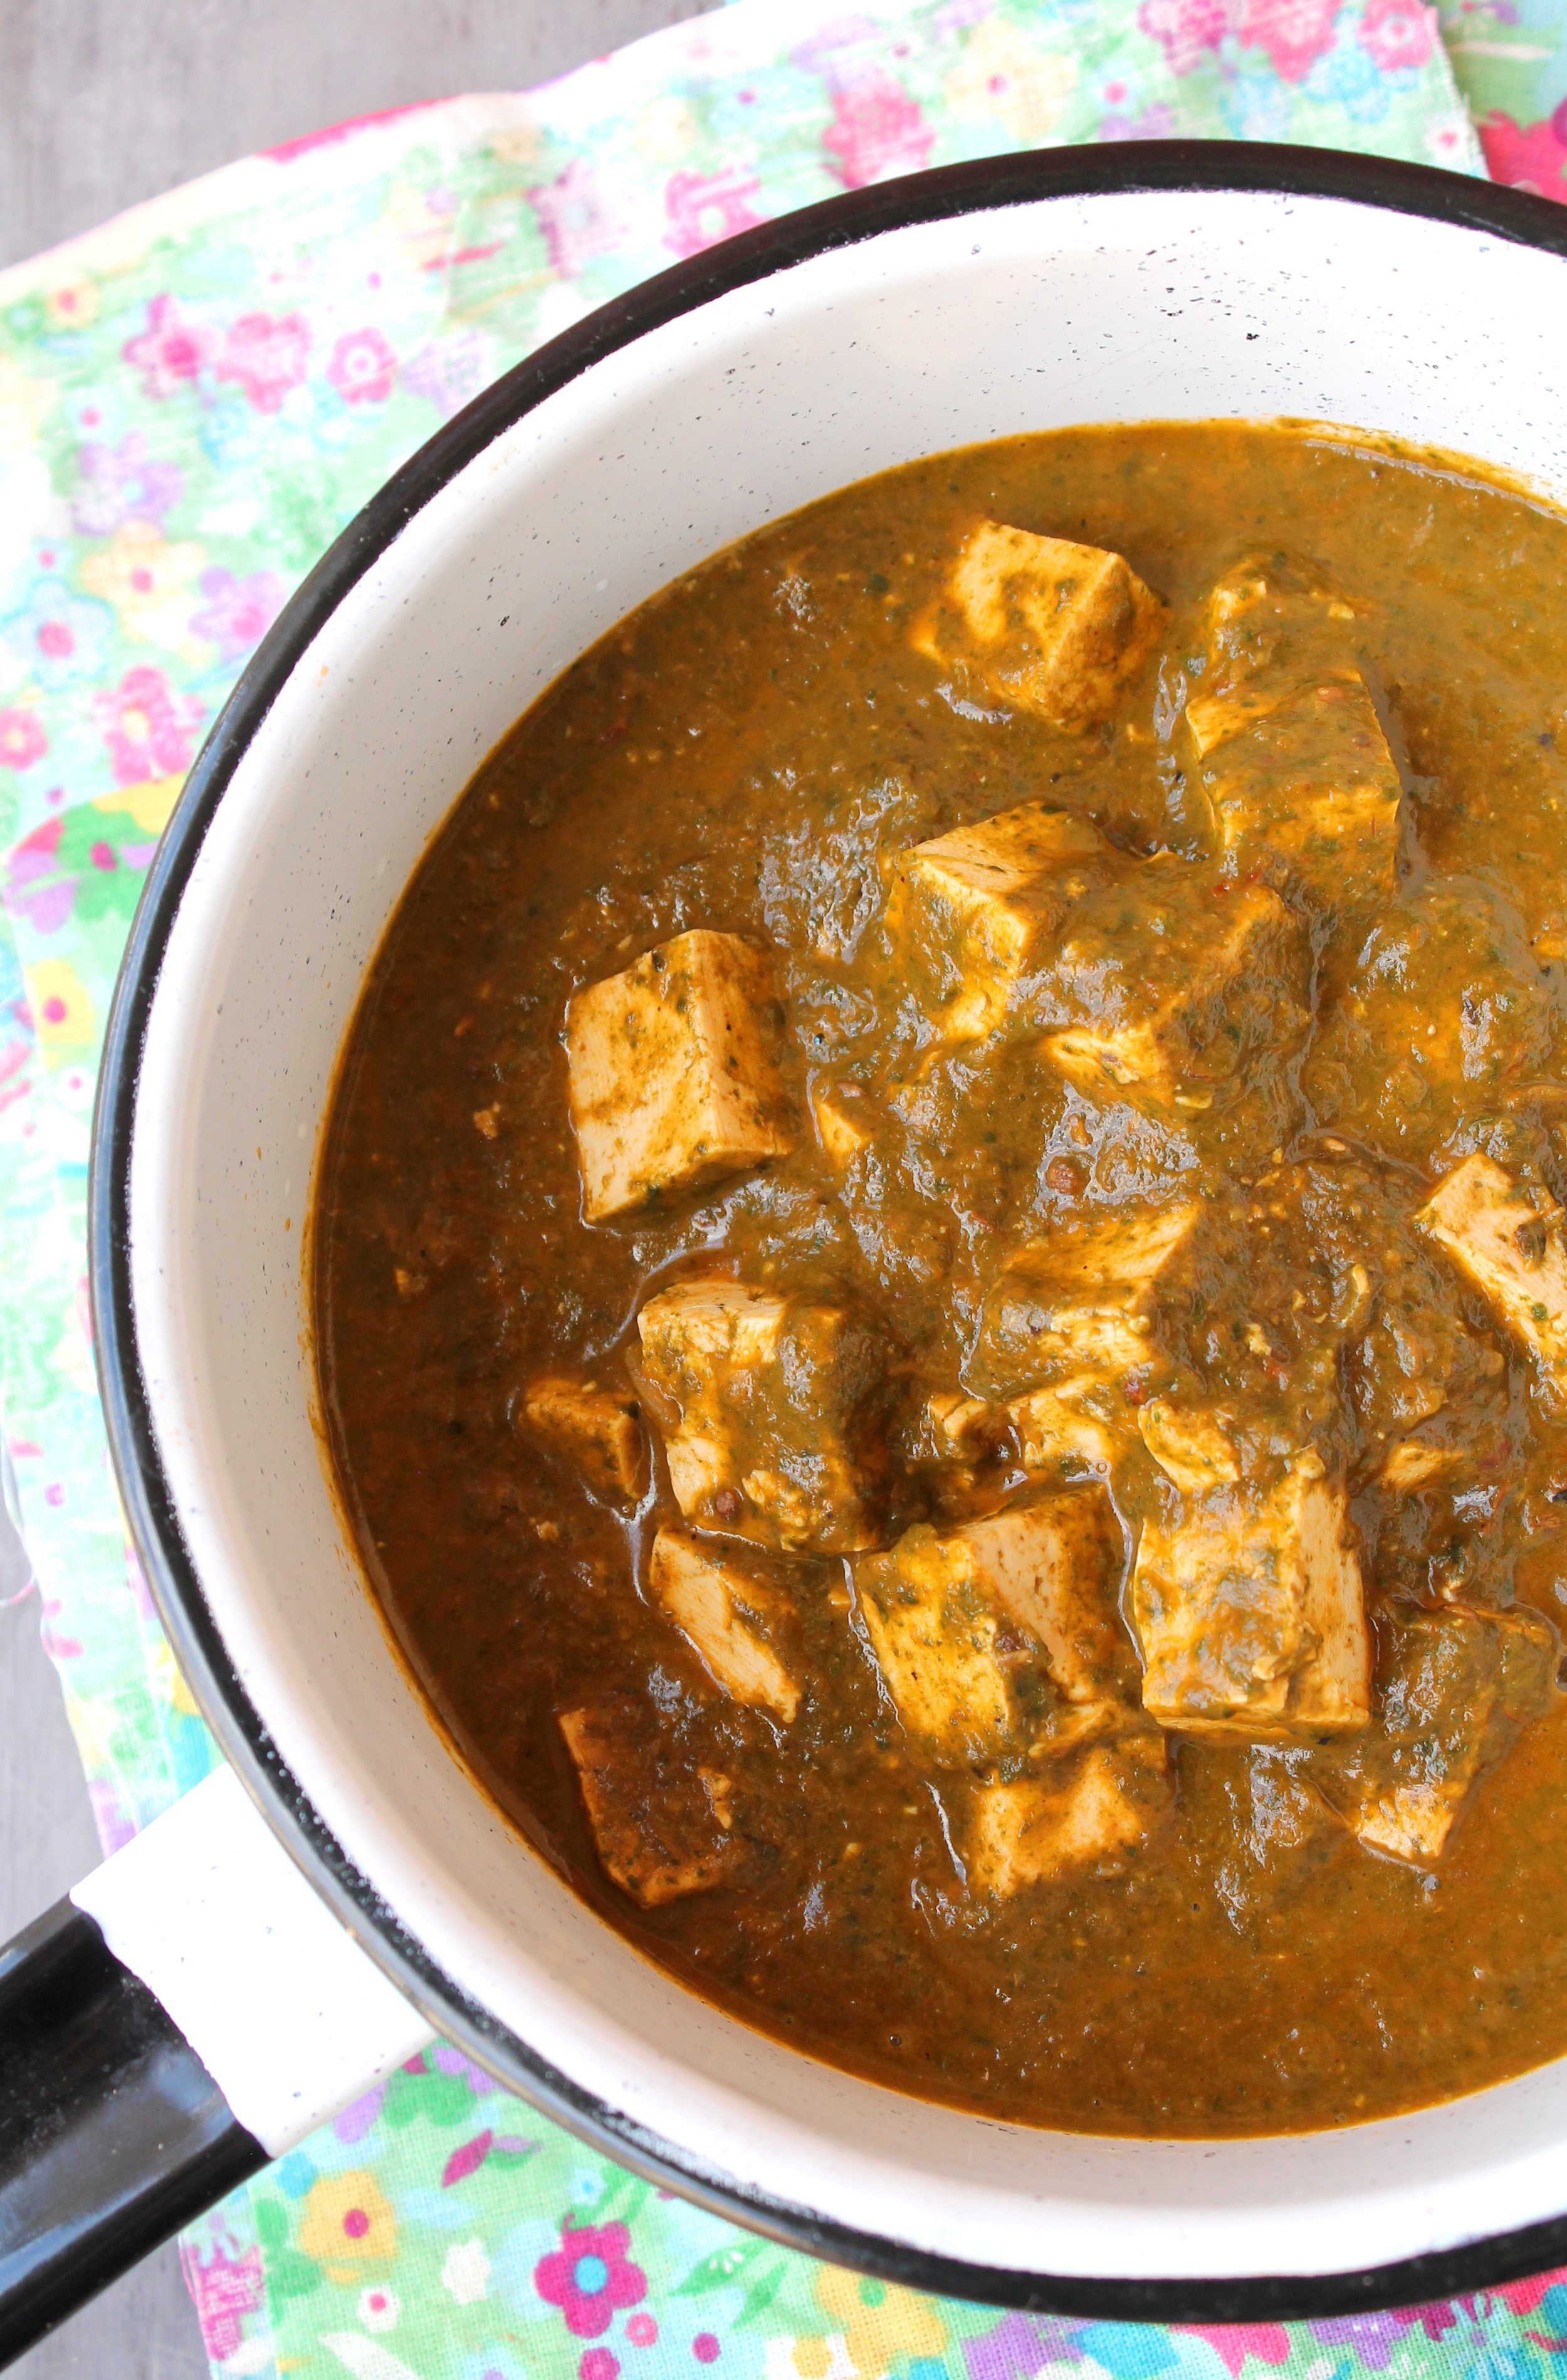 Palak tofu is a vegan spin on a classic vegetarian Indian dish 'palak paneer'! It's weeknight friendly and will come together in less than an hour.